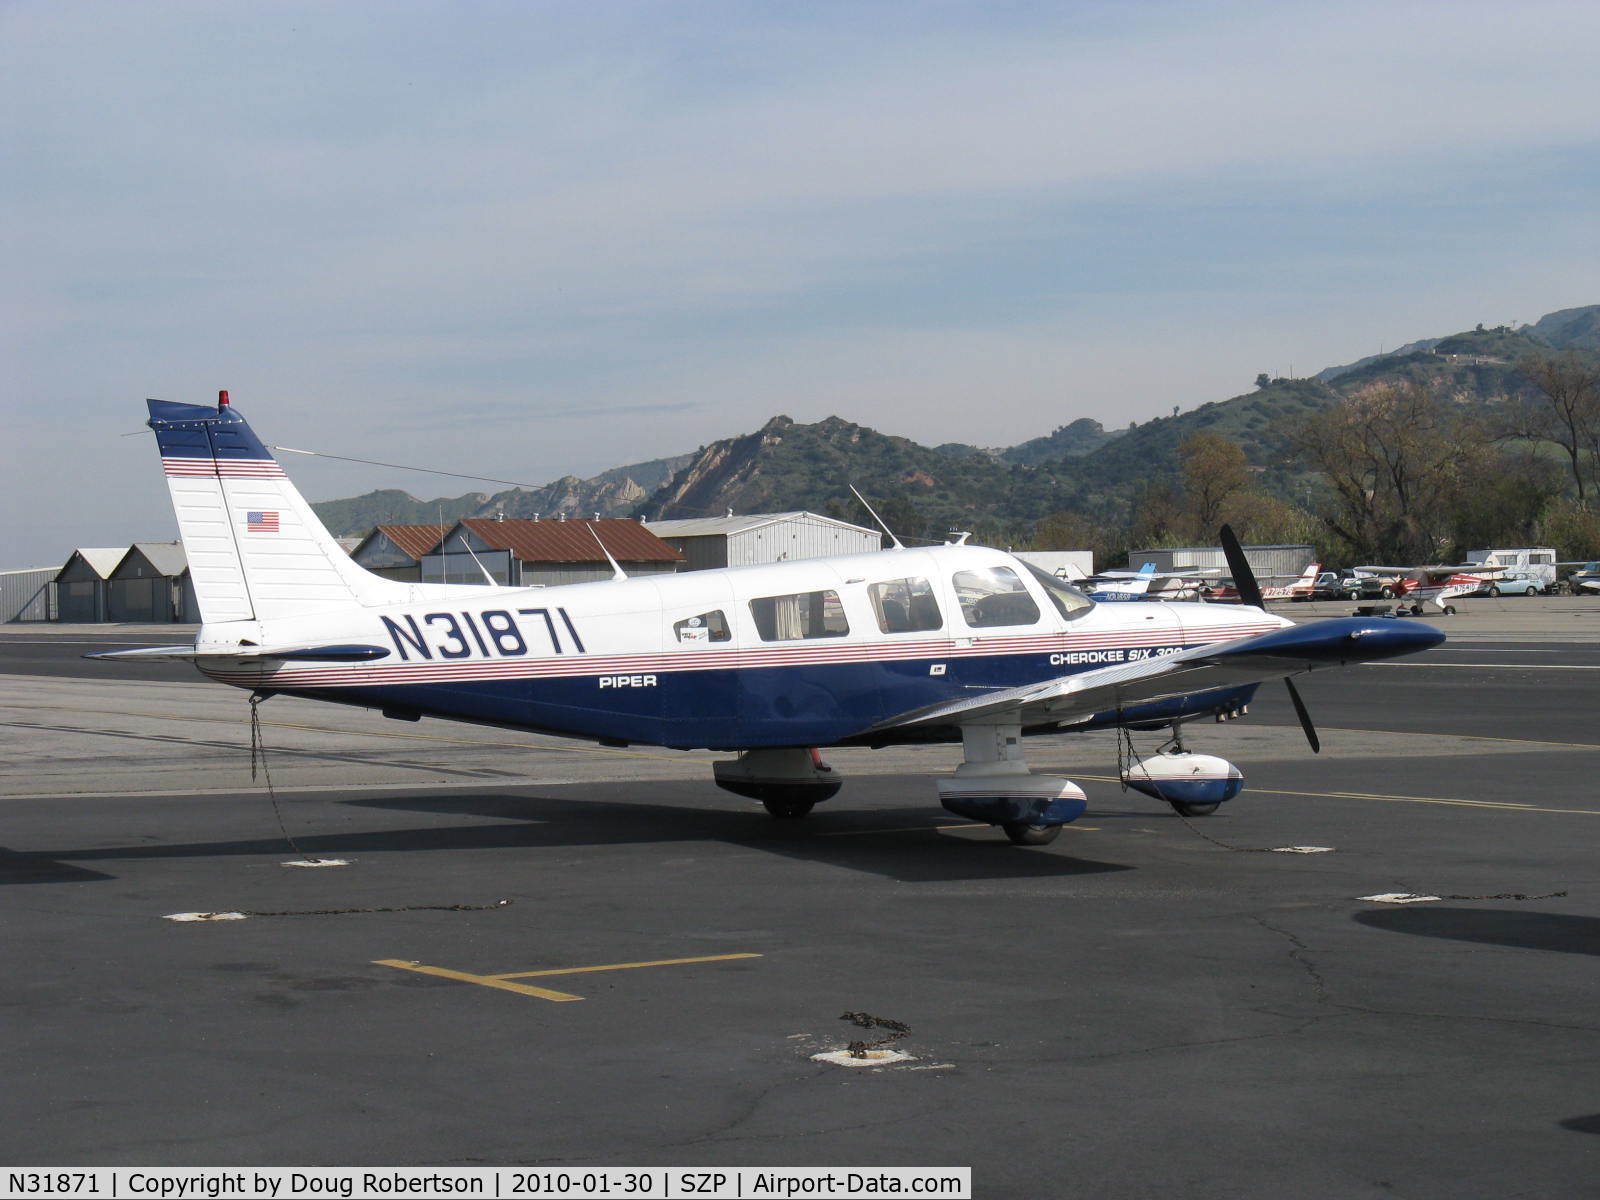 N31871, 1978 Piper PA-32-300 Cherokee Six C/N 32-7840150, 1978 Piper PA-32-300 CHEROKEE SIX, Lycoming IO-540-K1A5 300 Hp